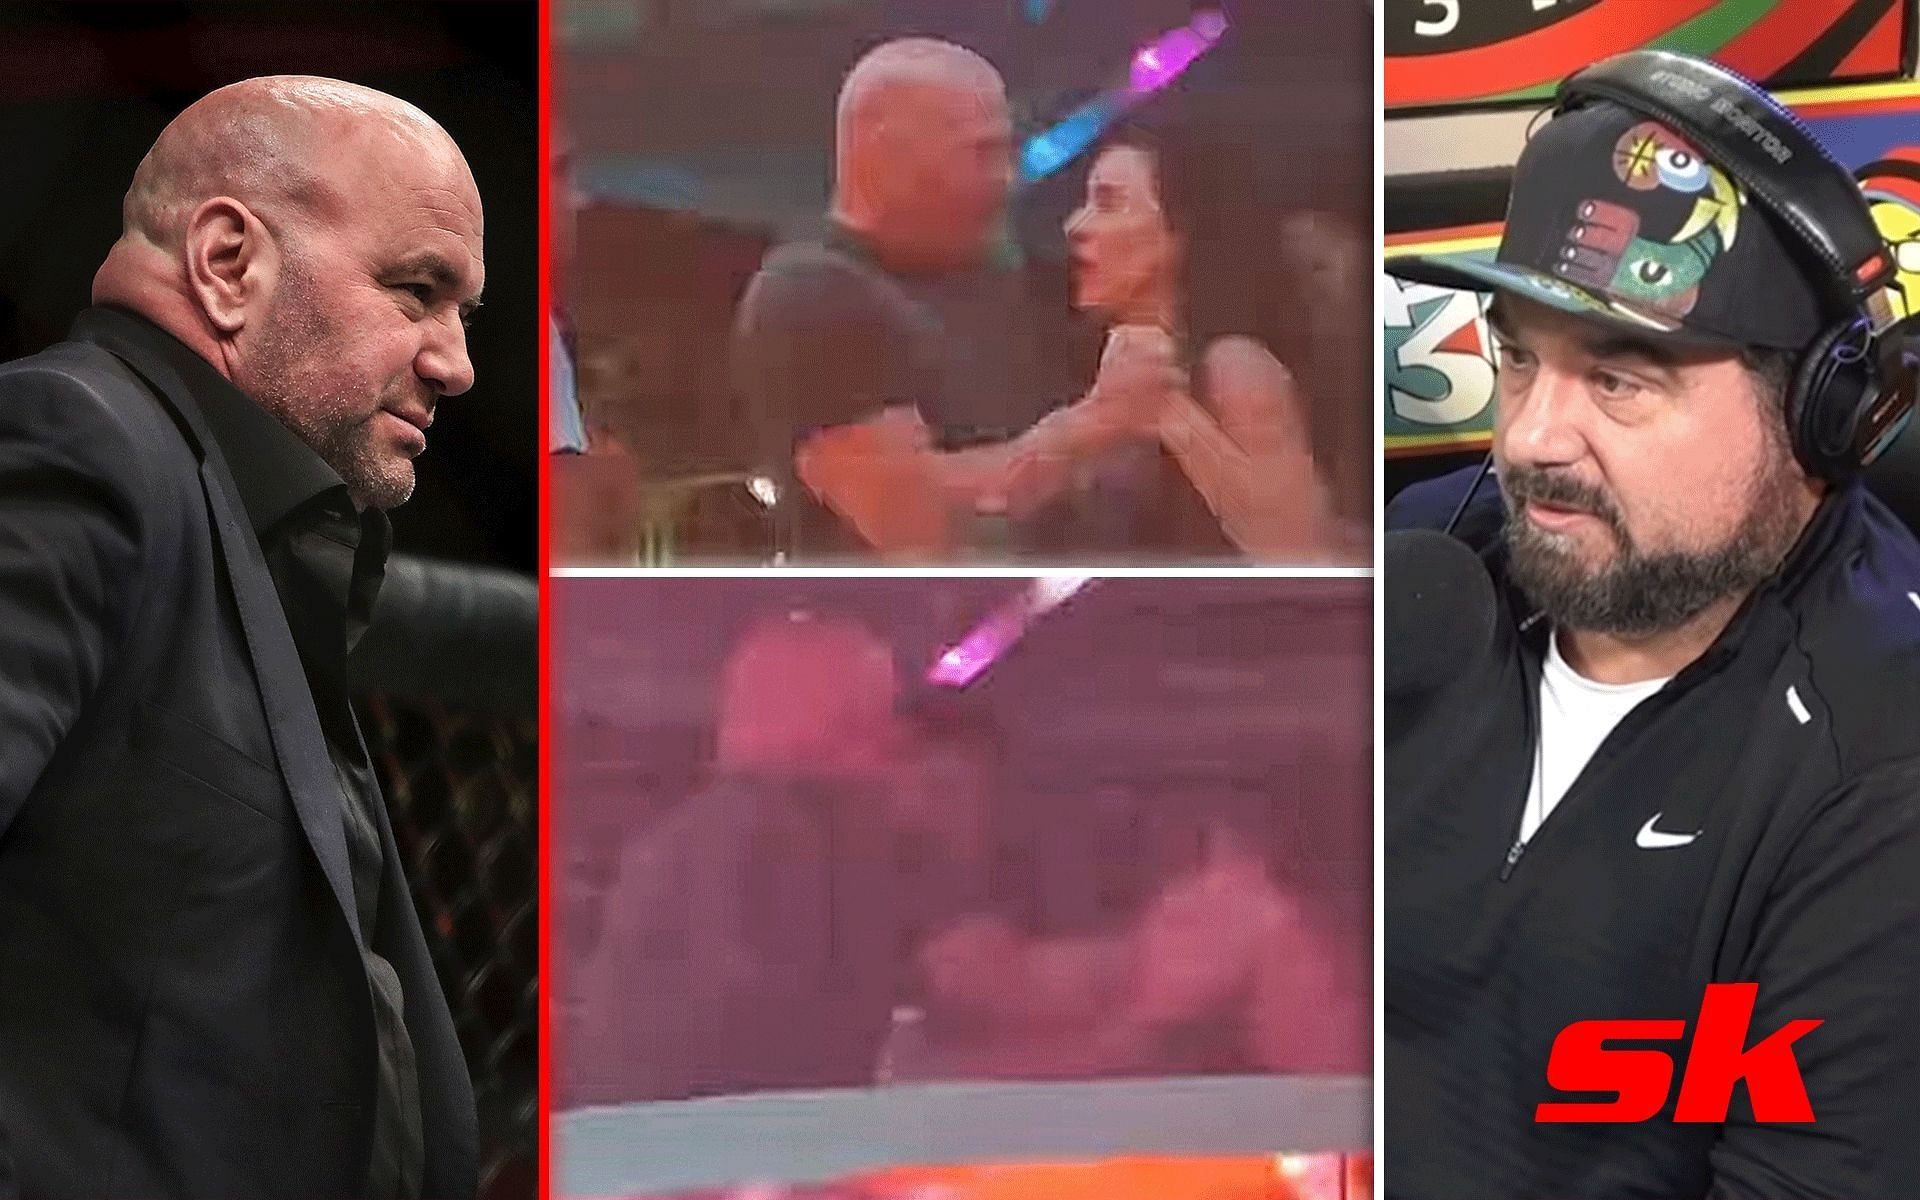 Ex-ESPN host believes &quot;compromised&quot; media coverage will result in zero consequences for Dana White [Images via: LeBatardShow, TMZSports | YouTube]